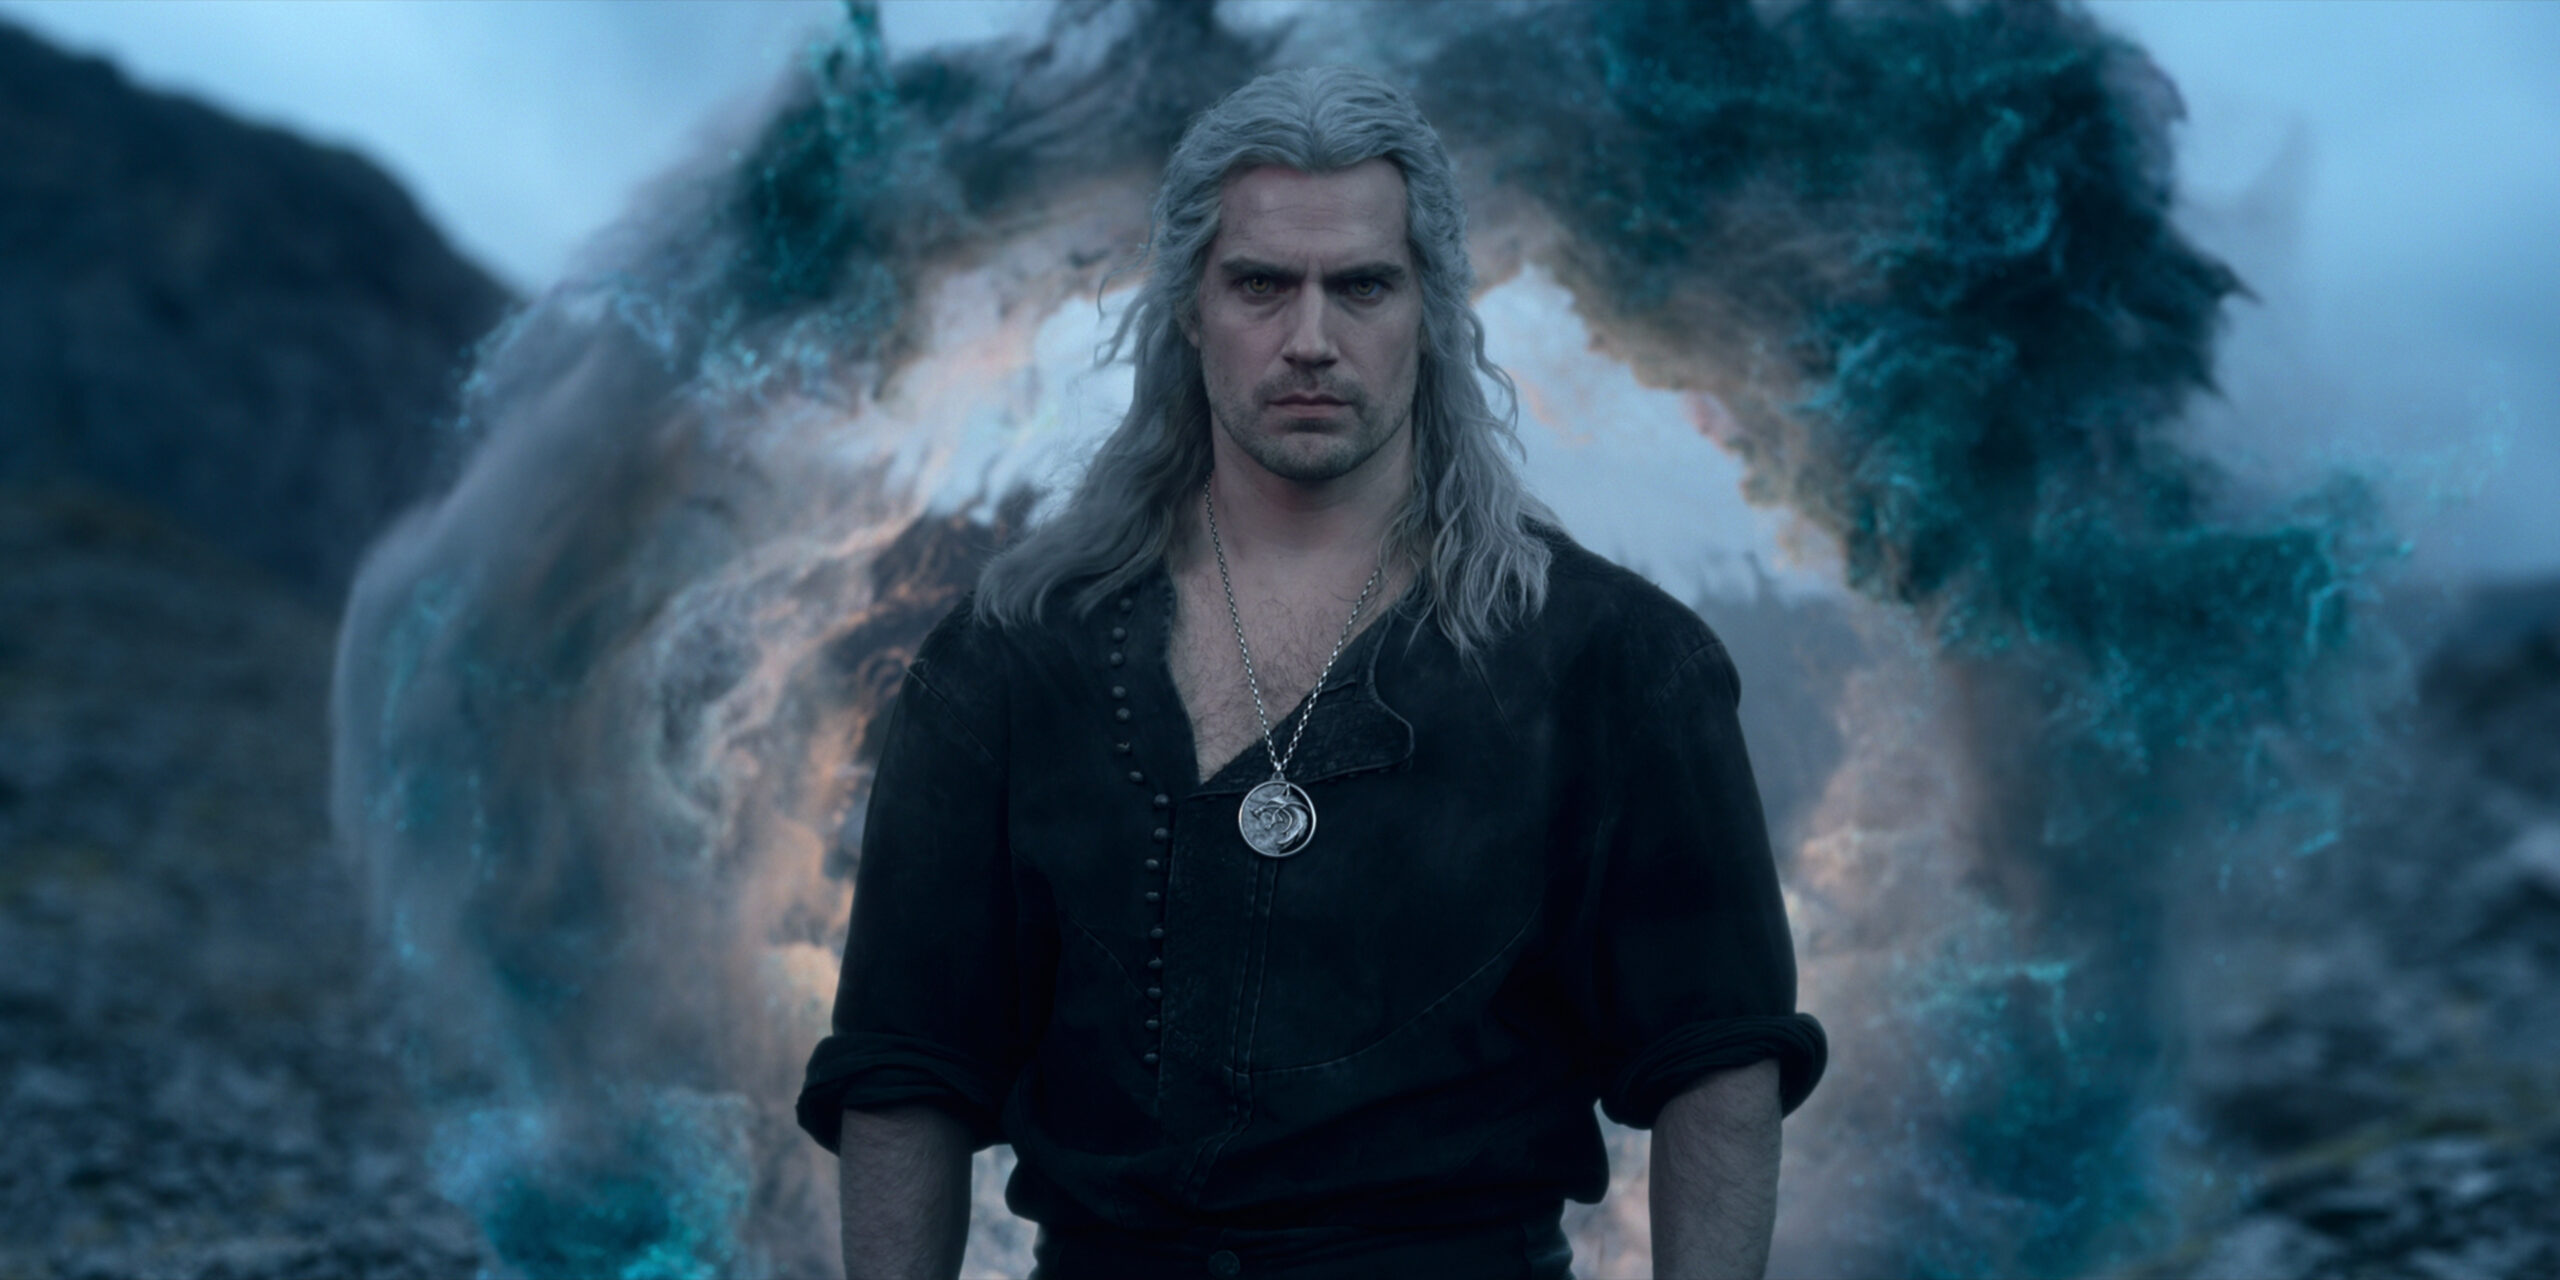 Geralt (Henry Cavill) unleashes his might in The Witcher Season 3 Episode 4 "The Invitation" (2023), Netflix